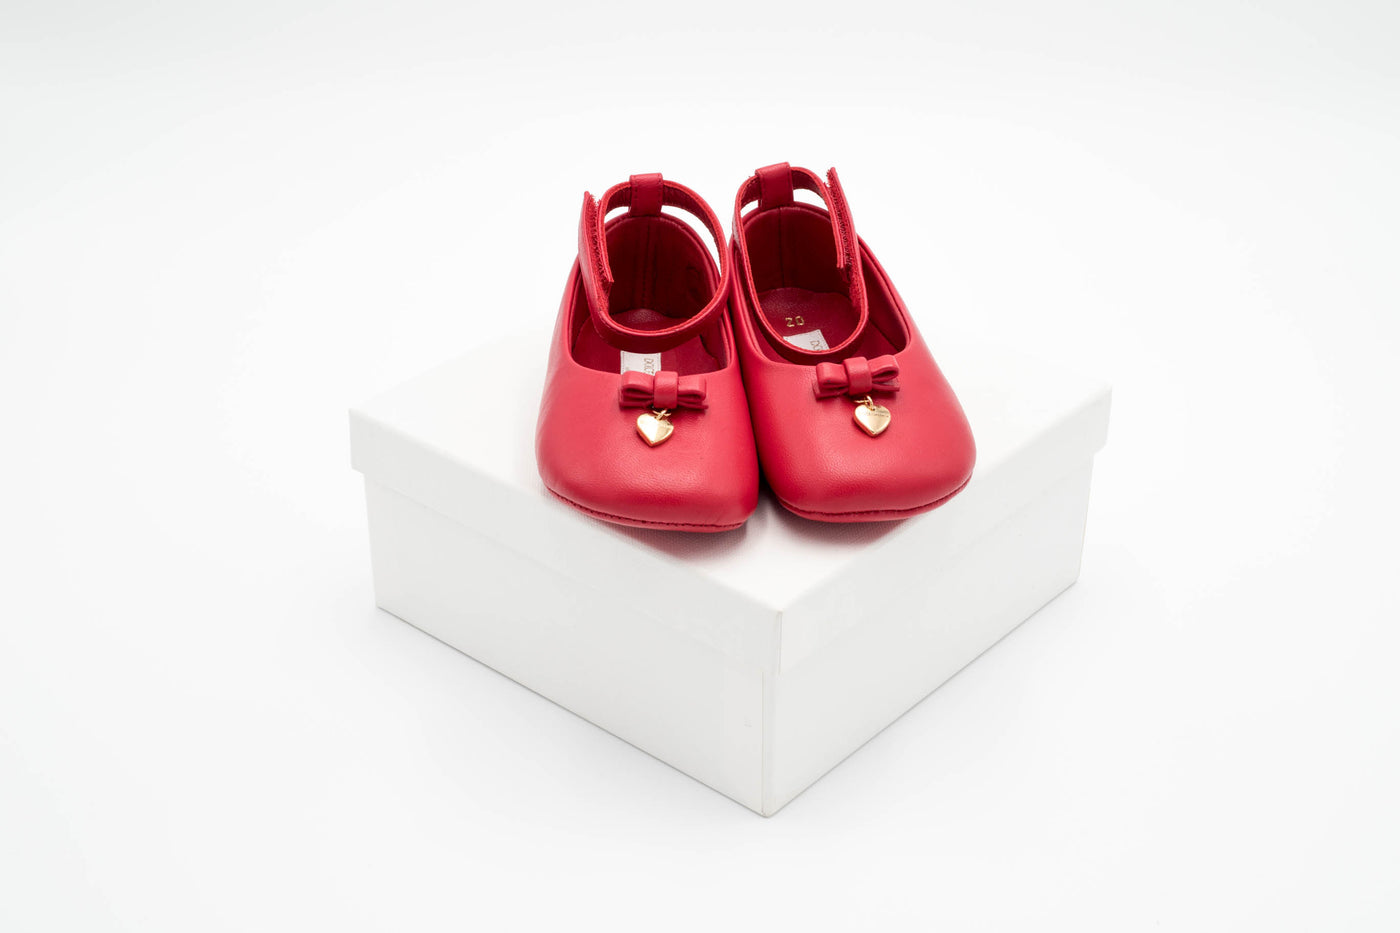 Dolce & Gabbana – Girls Red Ballerinas with Bow Detail